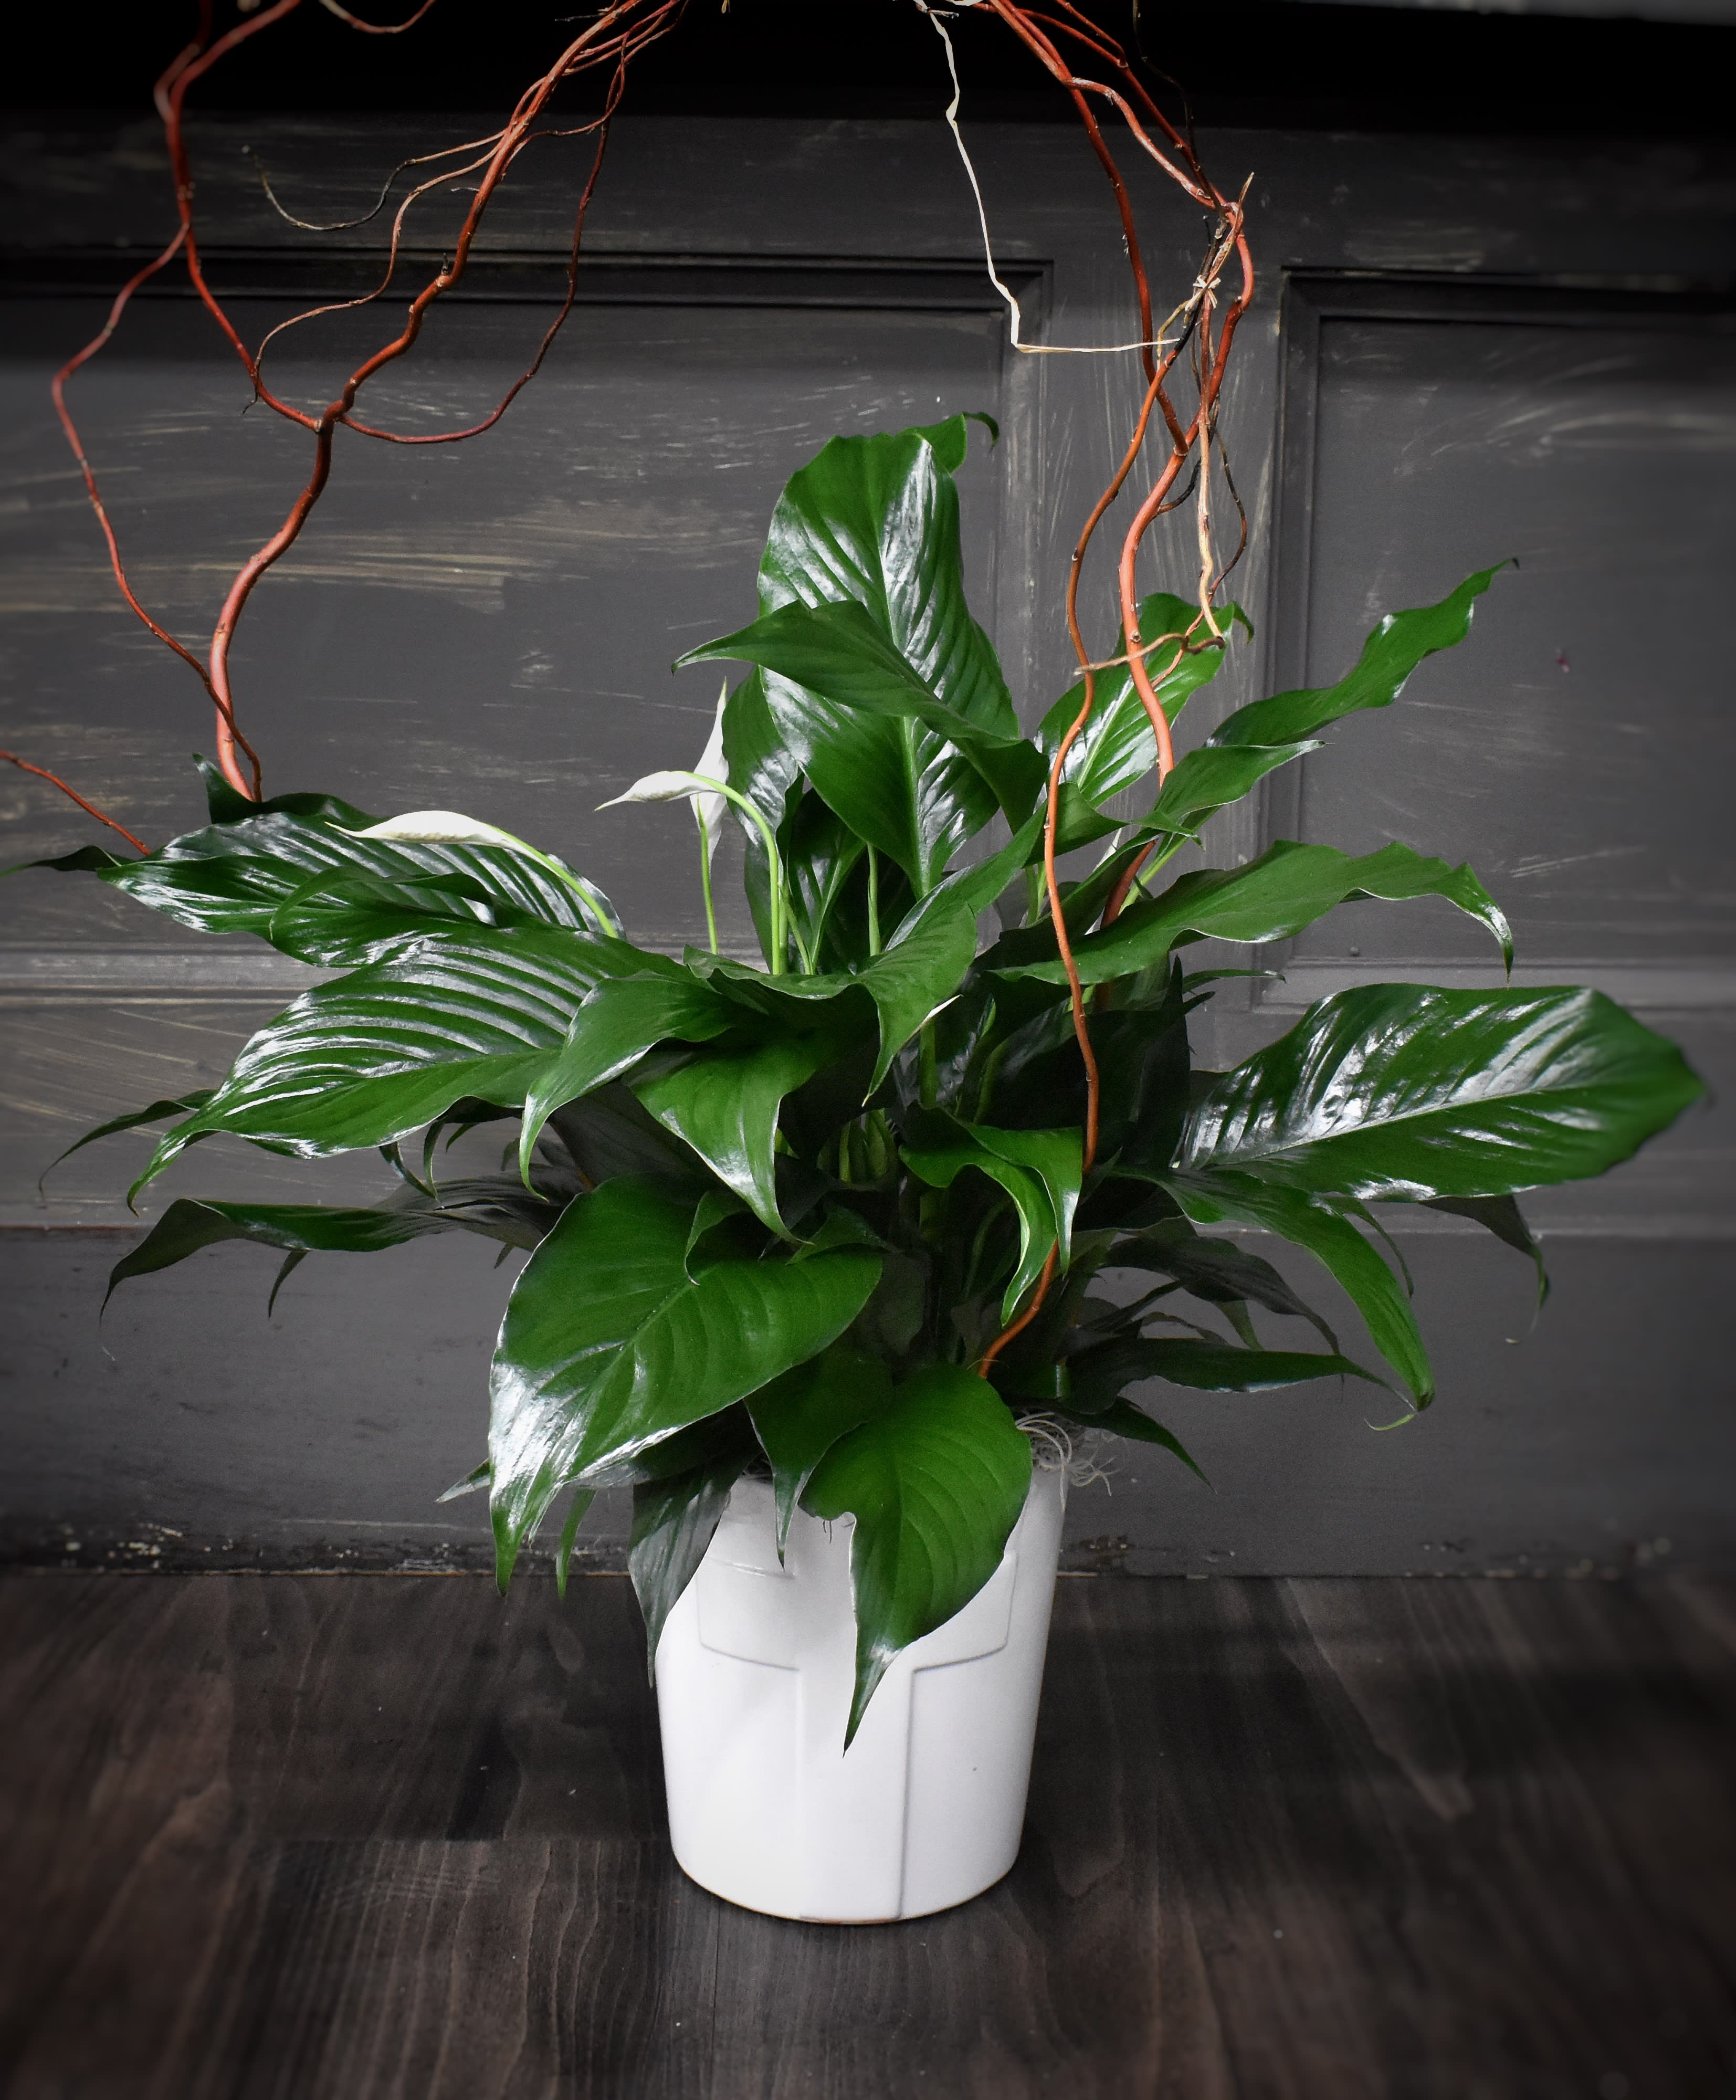 Peaceful Devotion - A peace lily (green plant) in a white decorative ceramic with a cross accented with branches.  Approximately 20inches tall by 14inches wide